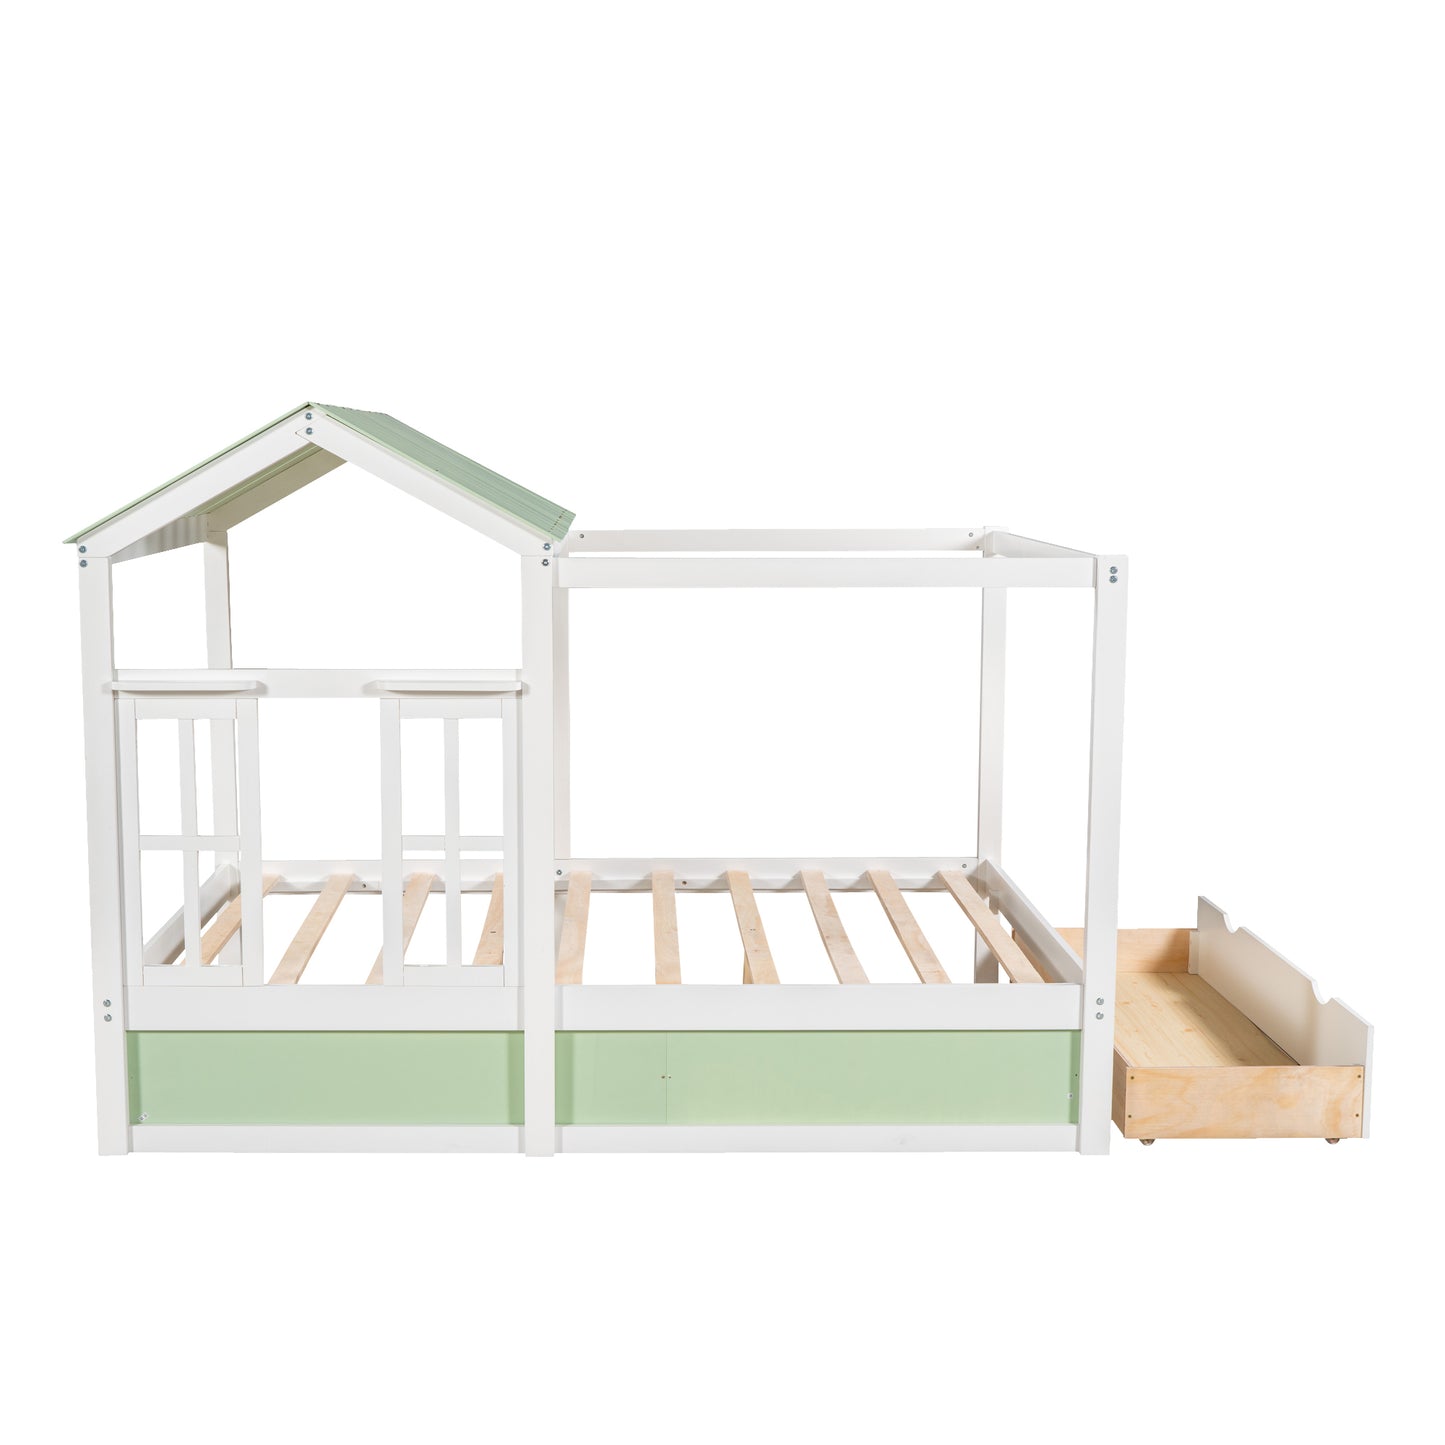 Full Size House Bed with Roof, Window and Drawer - Green + White